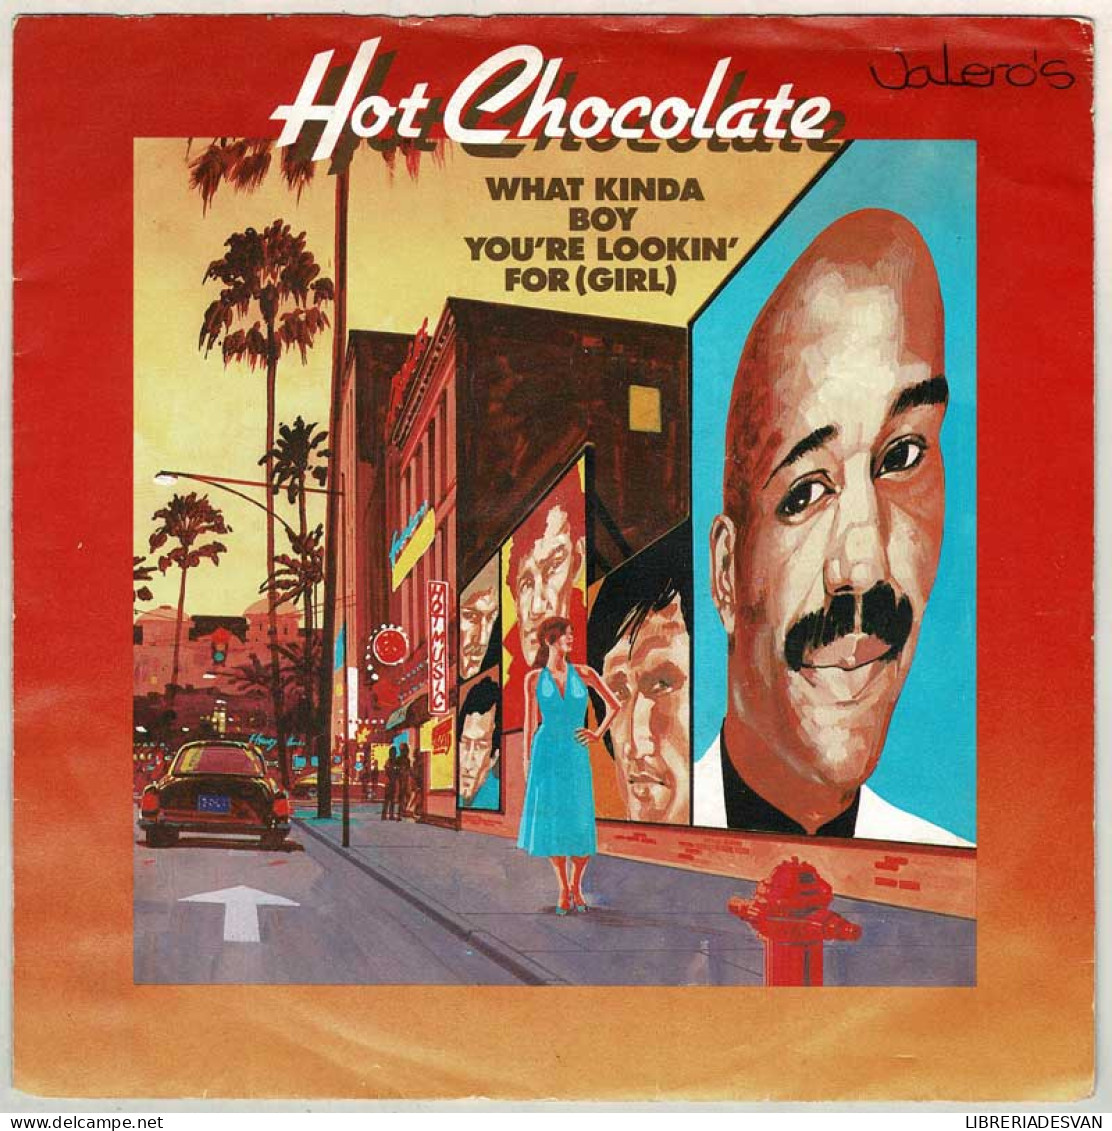 Hot Chocolate - What Kinda Boy You're Lookin' For (Girl) / Got To Get Back To Work. Single - Sonstige & Ohne Zuordnung